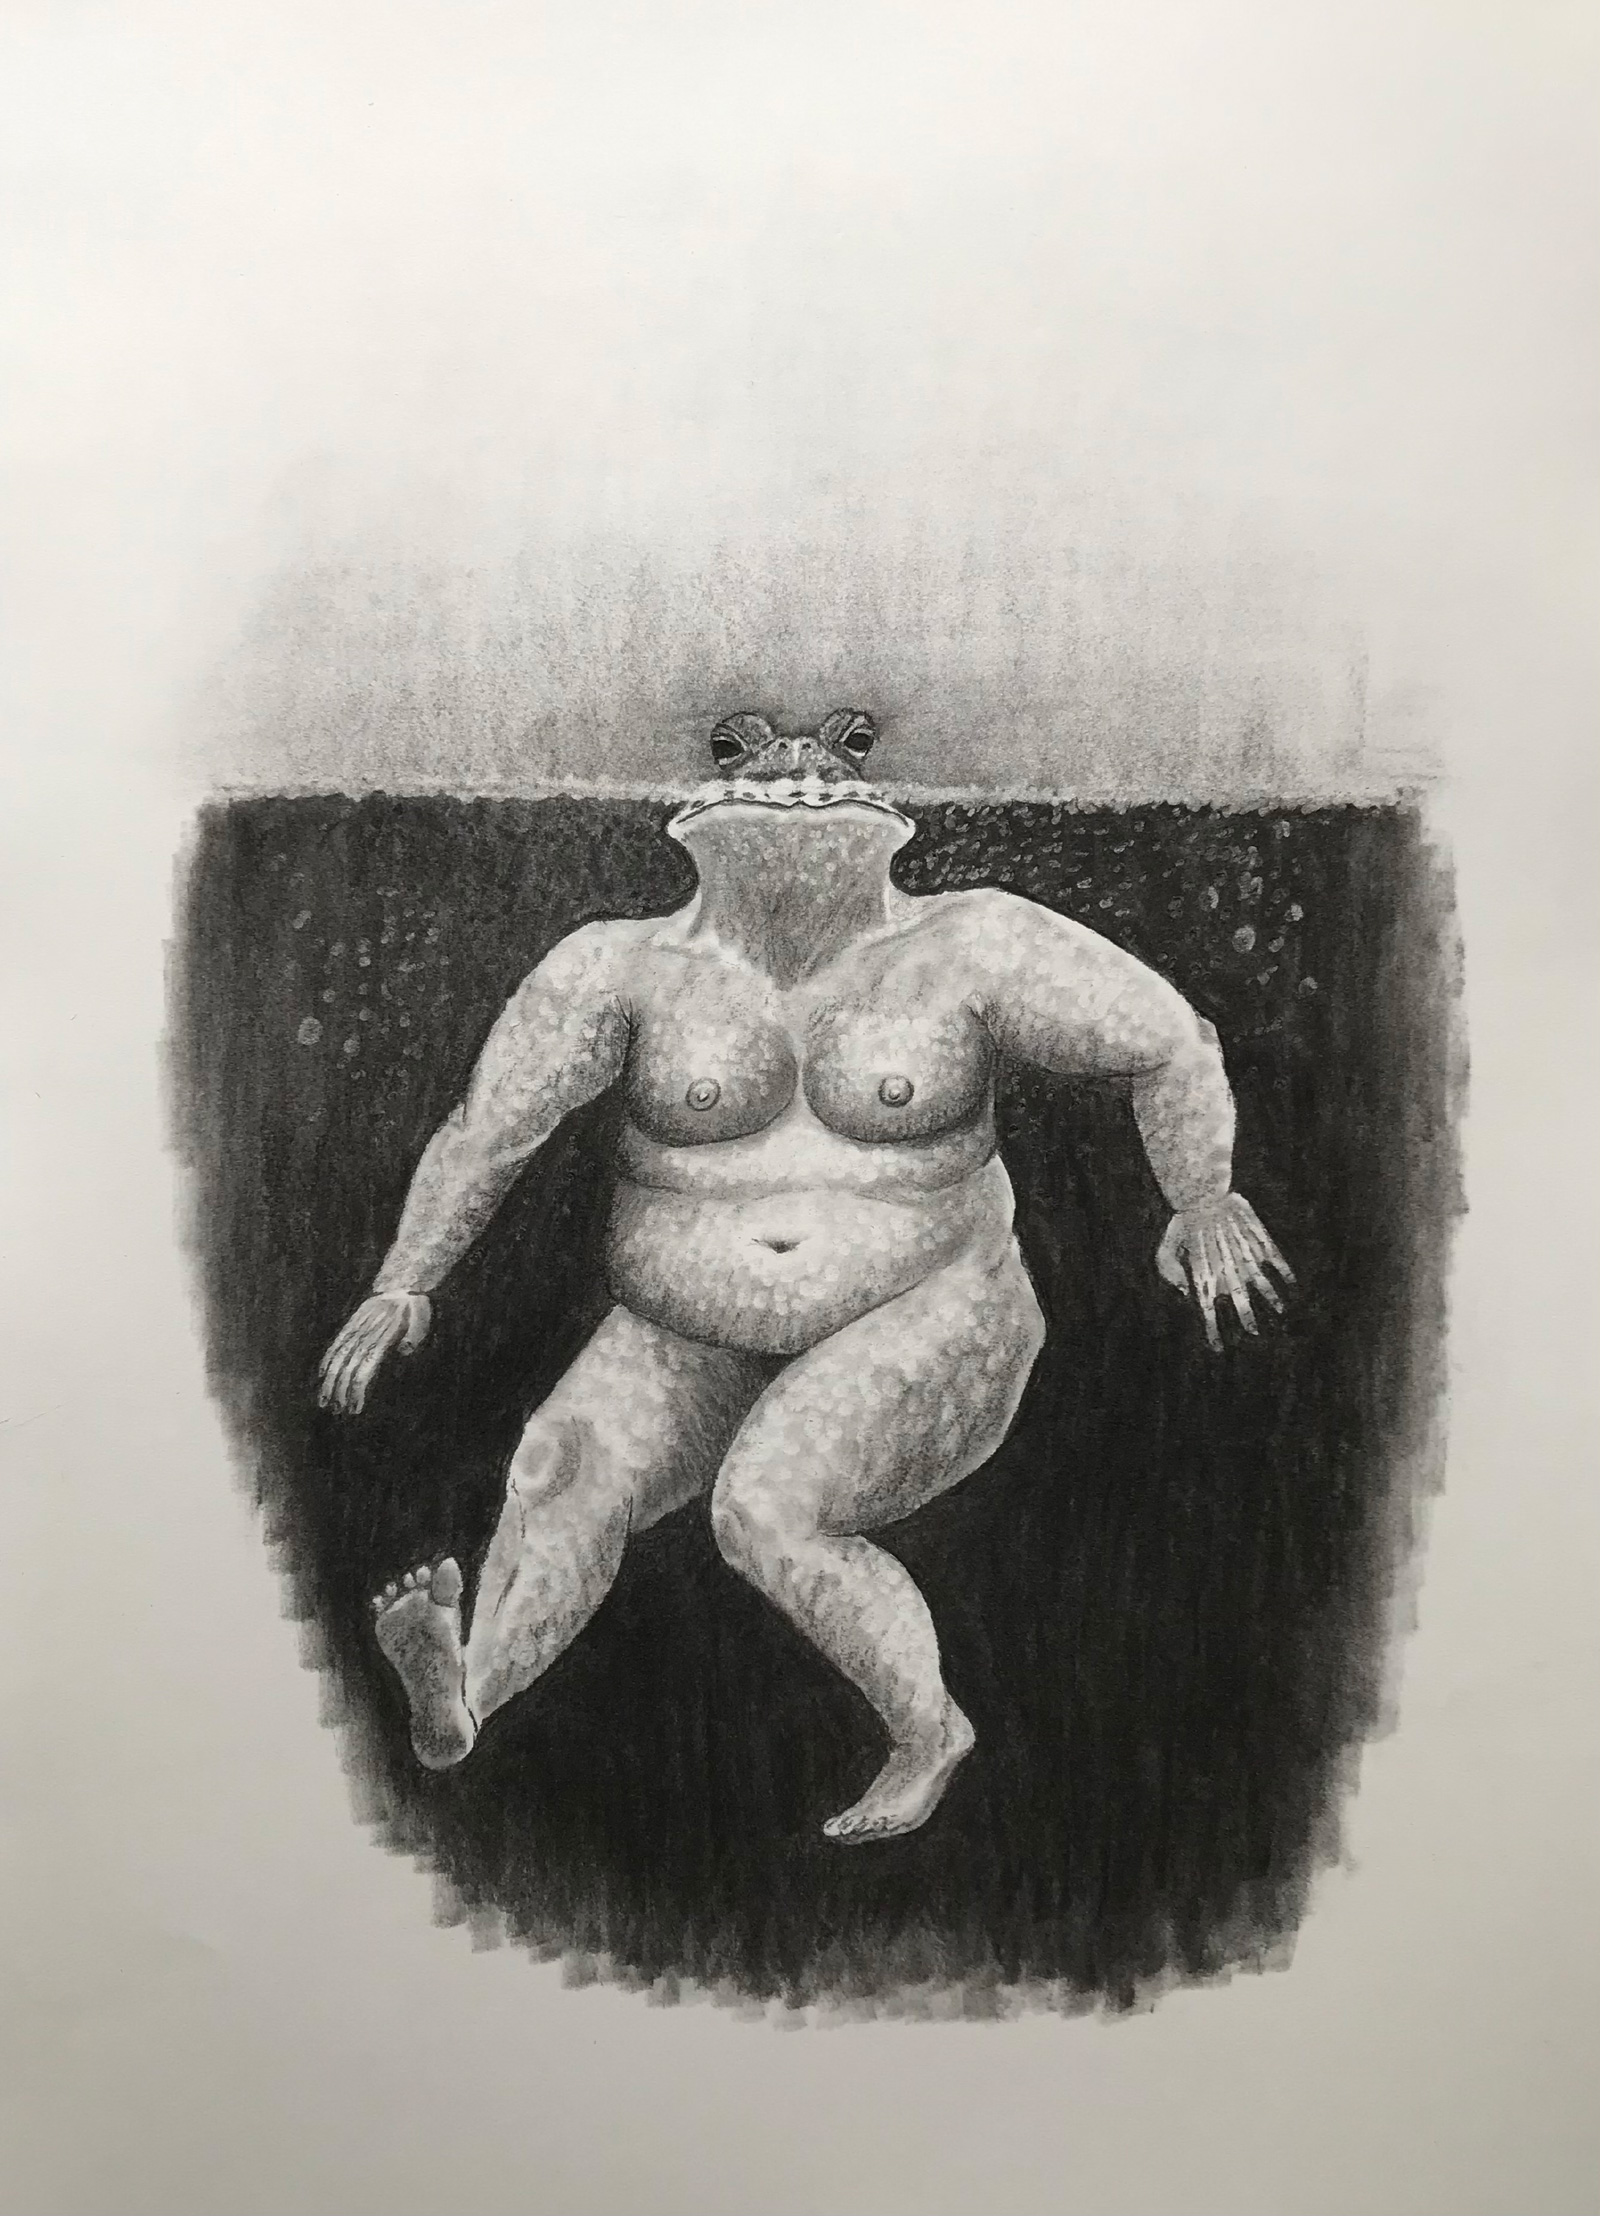 A charcoal drawing of a curvy naked female body but with webbed hands, floats in a bubbly, square of black ink. Above the surface there is a frog’s head with eyes looking straight ahead. The rest of the background is white.